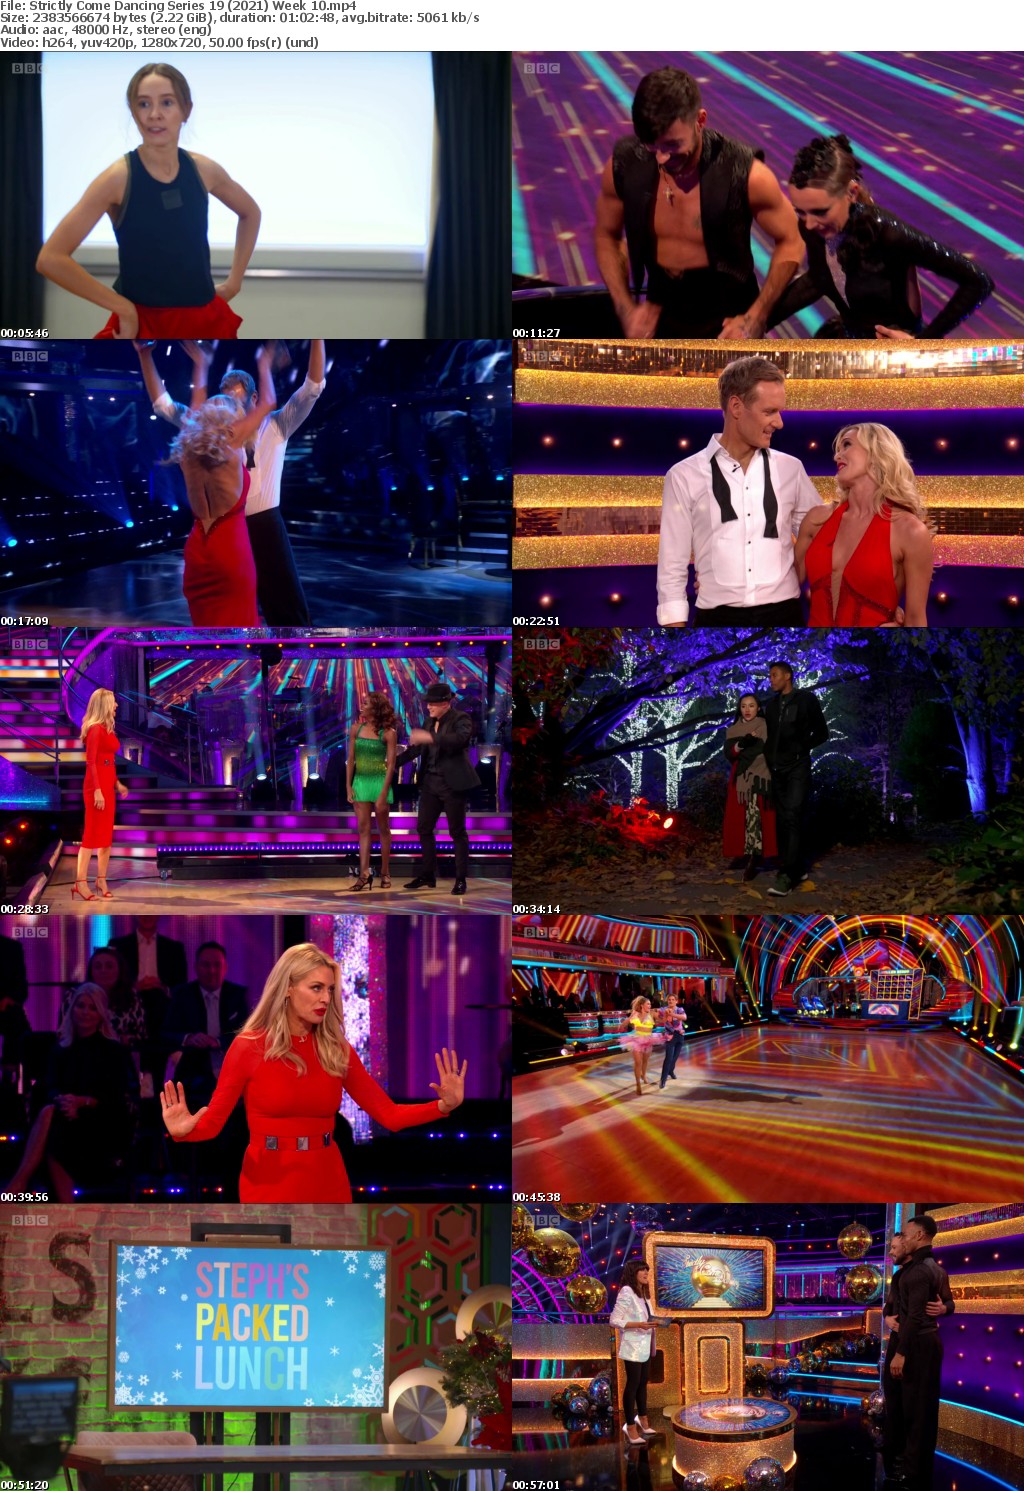 Strictly Come Dancing Series 19 (2021) Week 10 (1280x720p HD, 50fps, soft Eng subs)